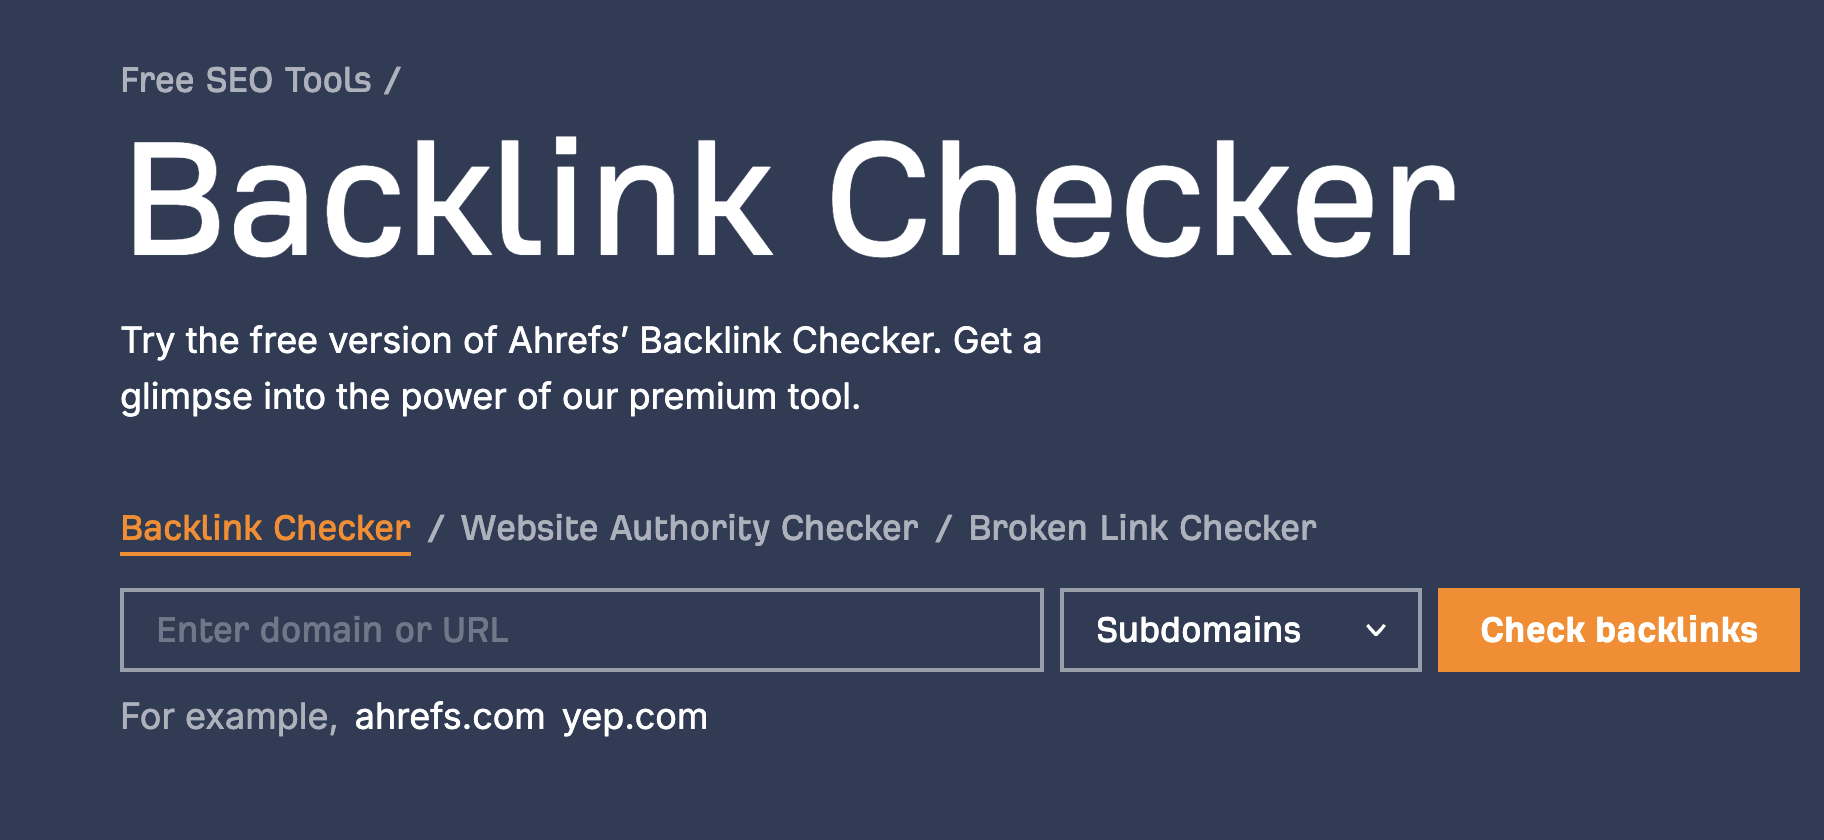 An image showing Ahref backlink checker